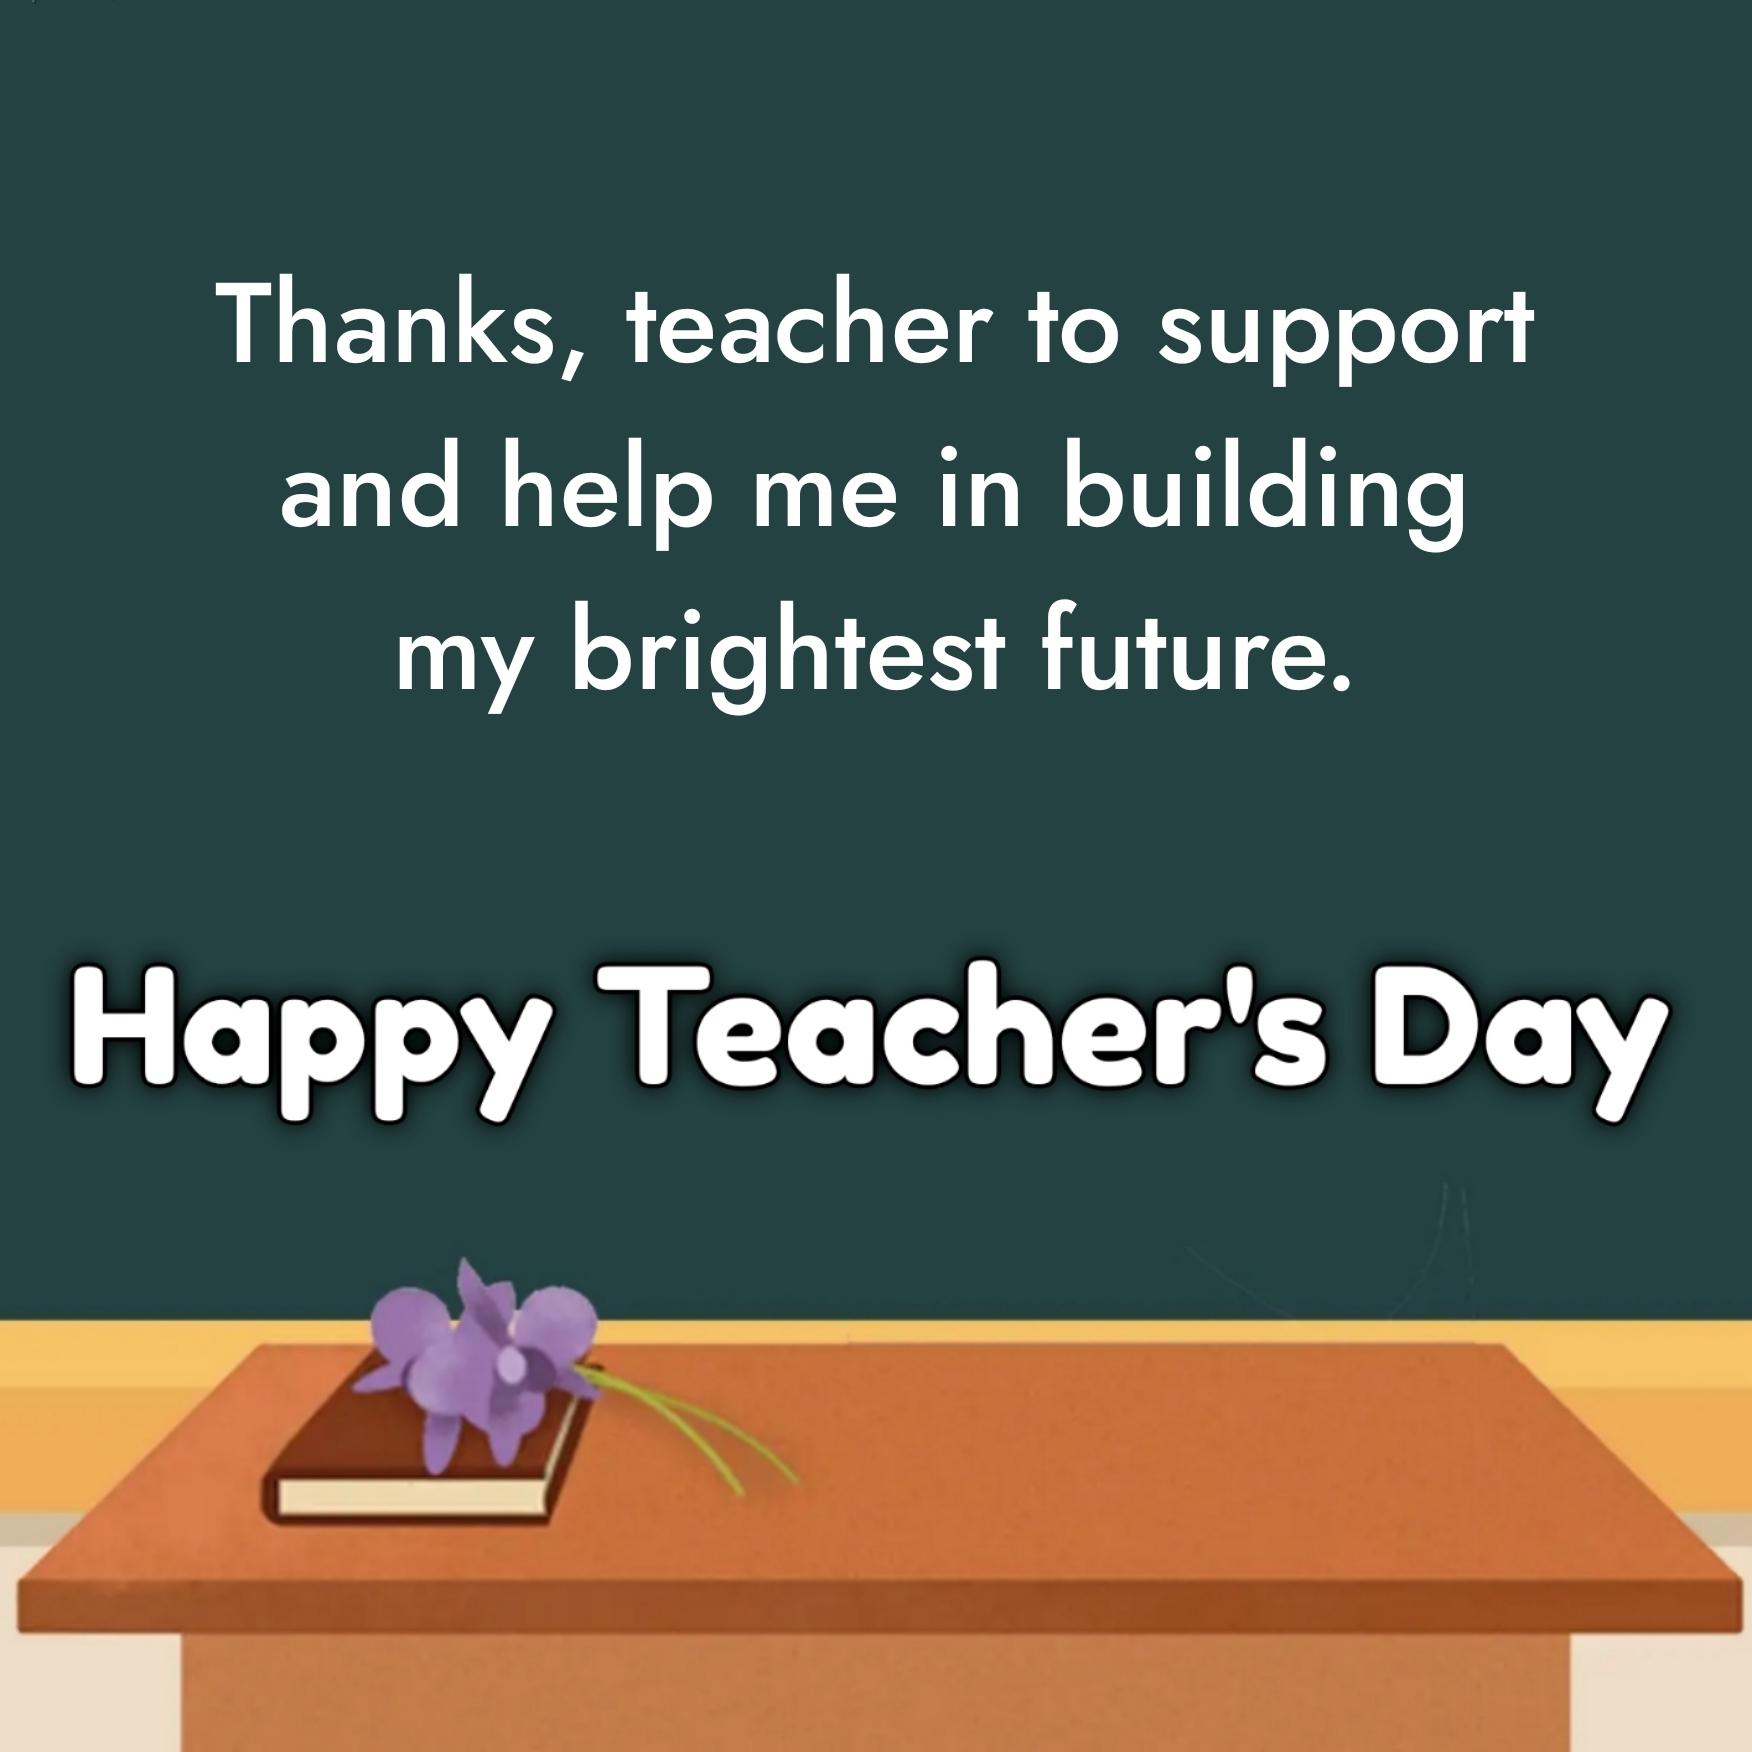 Thanks teacher to support and help me